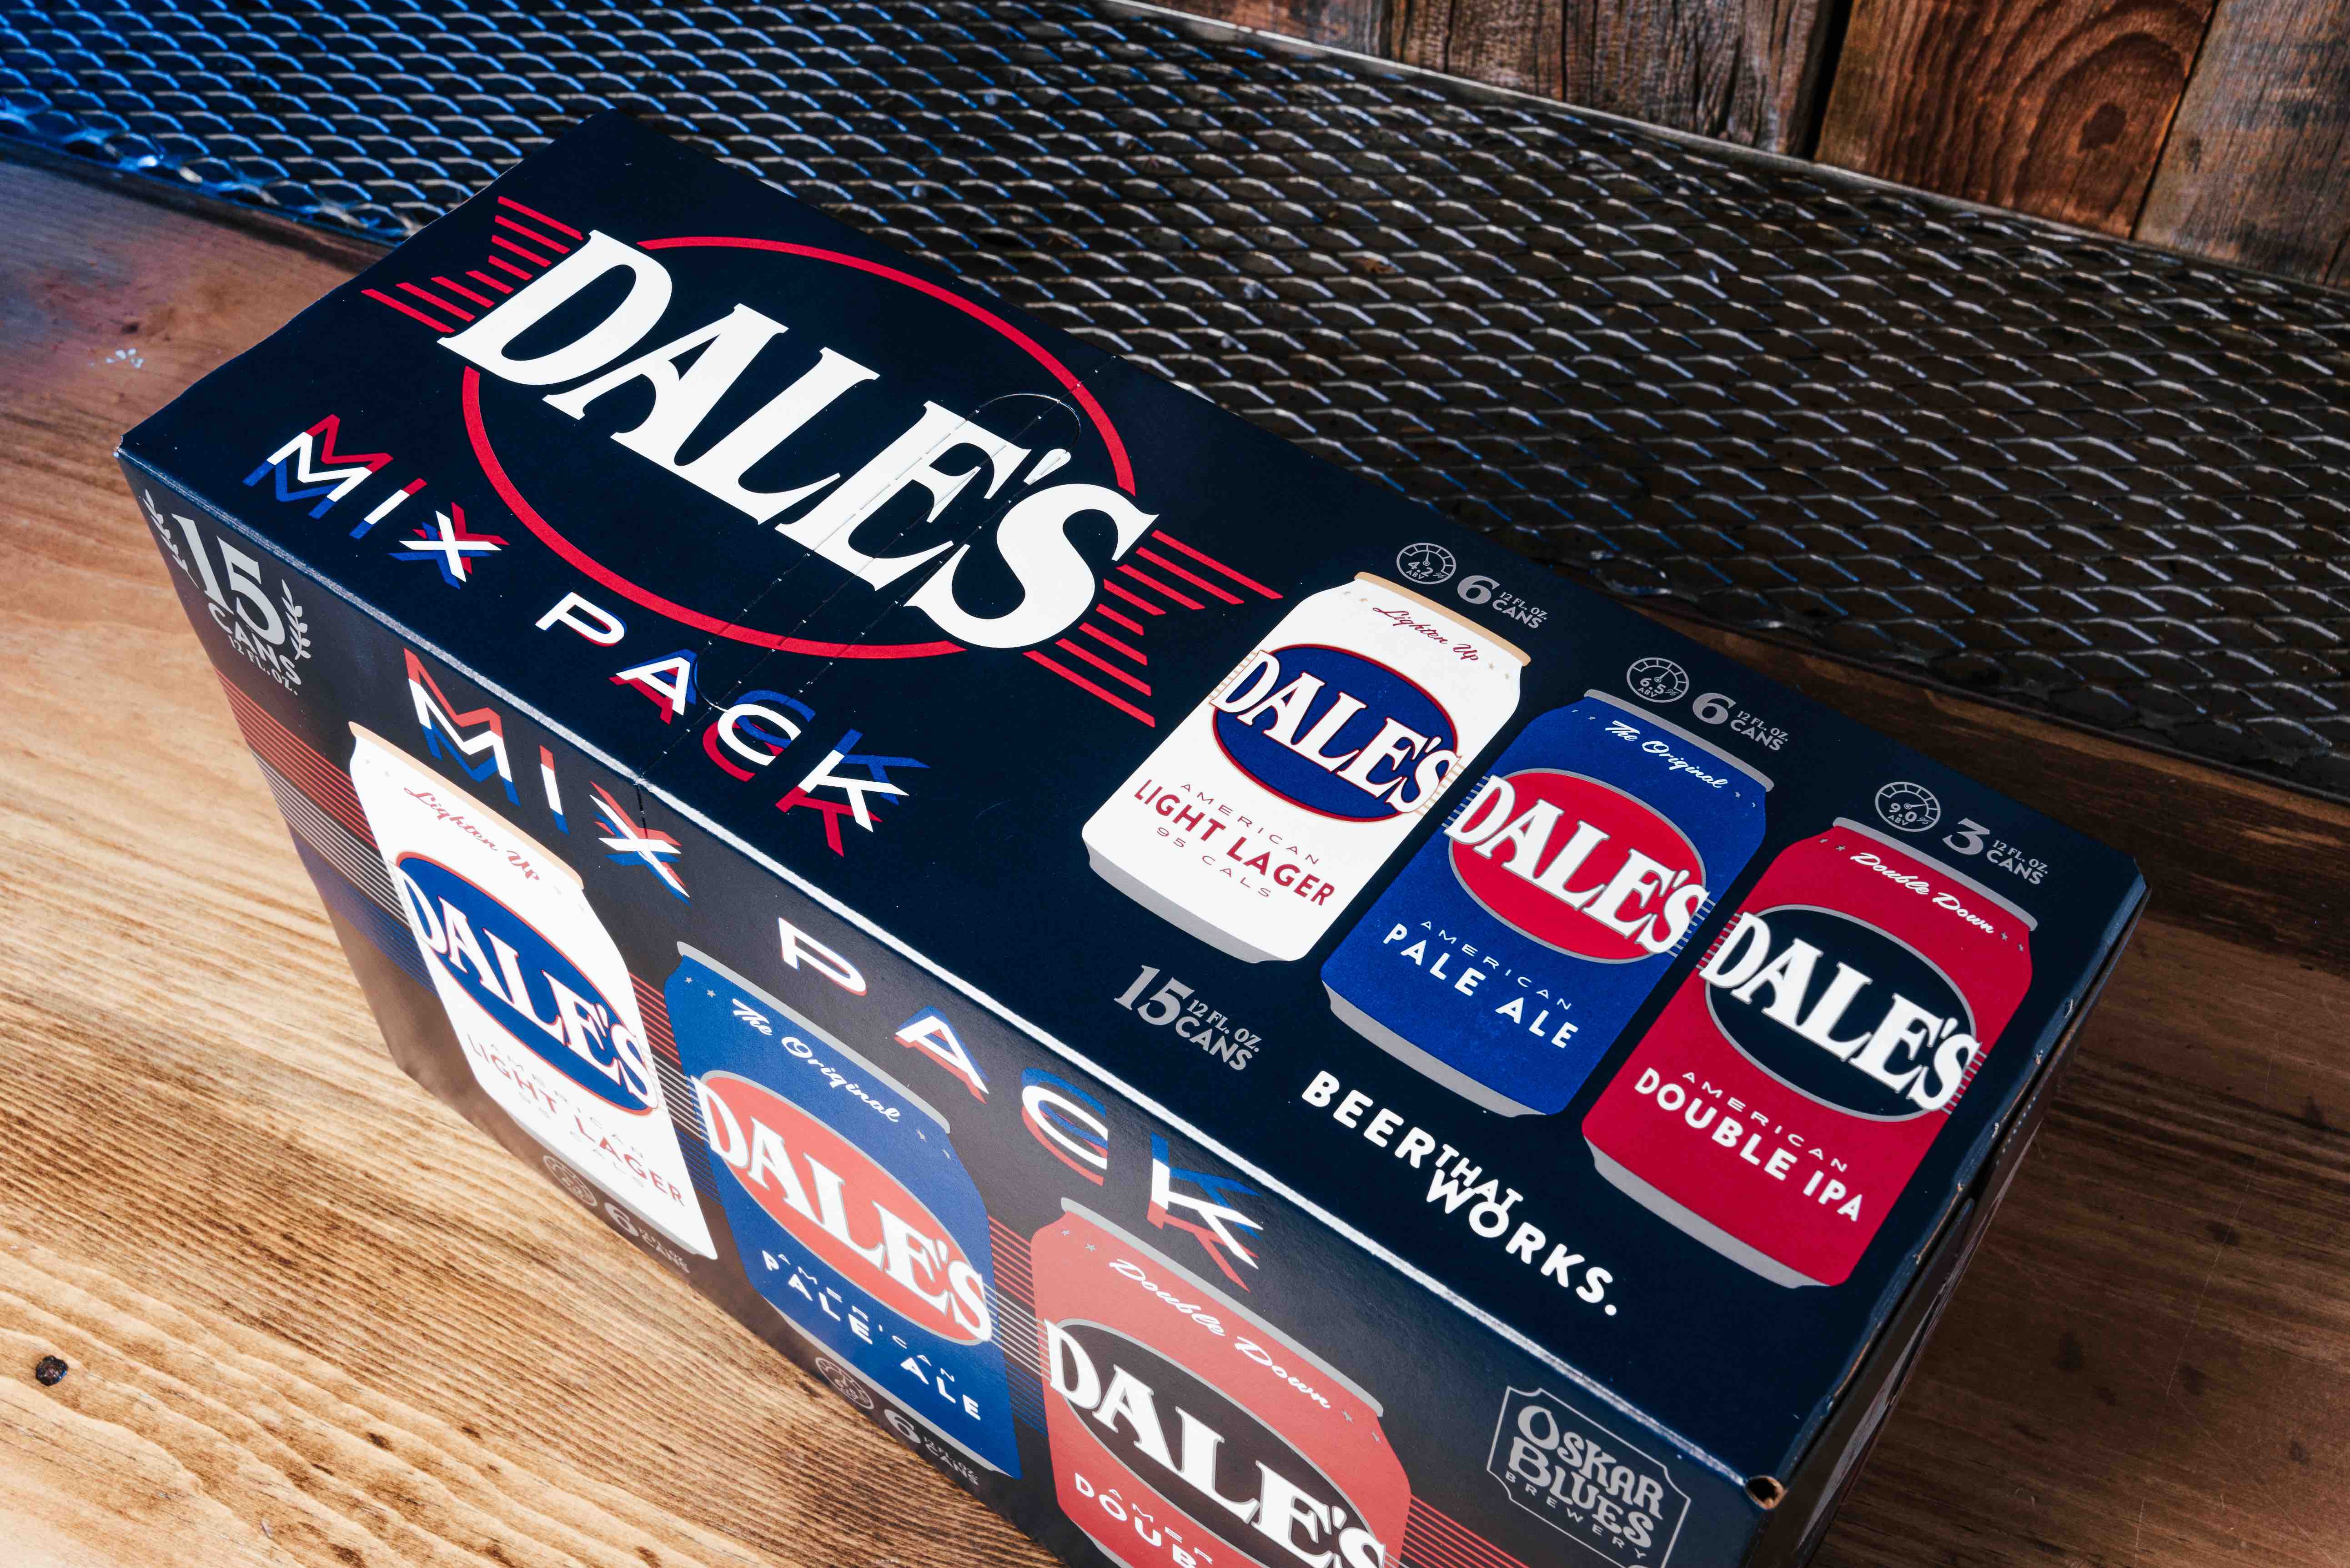 The new Dale's Mix Pack featuring Dales Pale Ale, Dale’s American Light Lager, and Dale’s American Double IPA. (image courtesy of Oskar Blues Brewery)